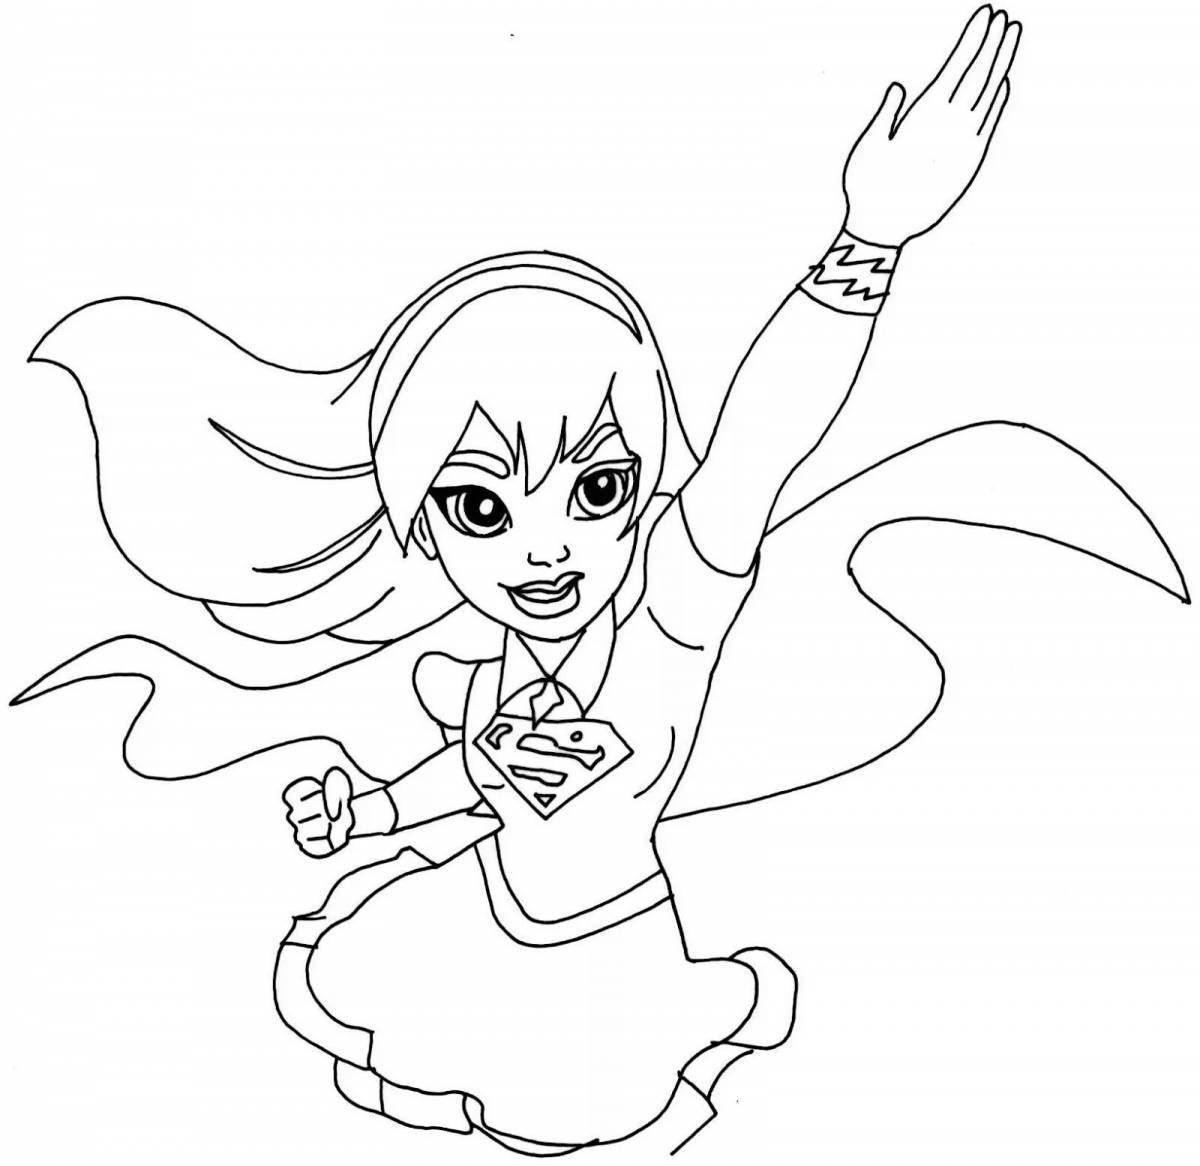 Super hero high dynamic coloring page